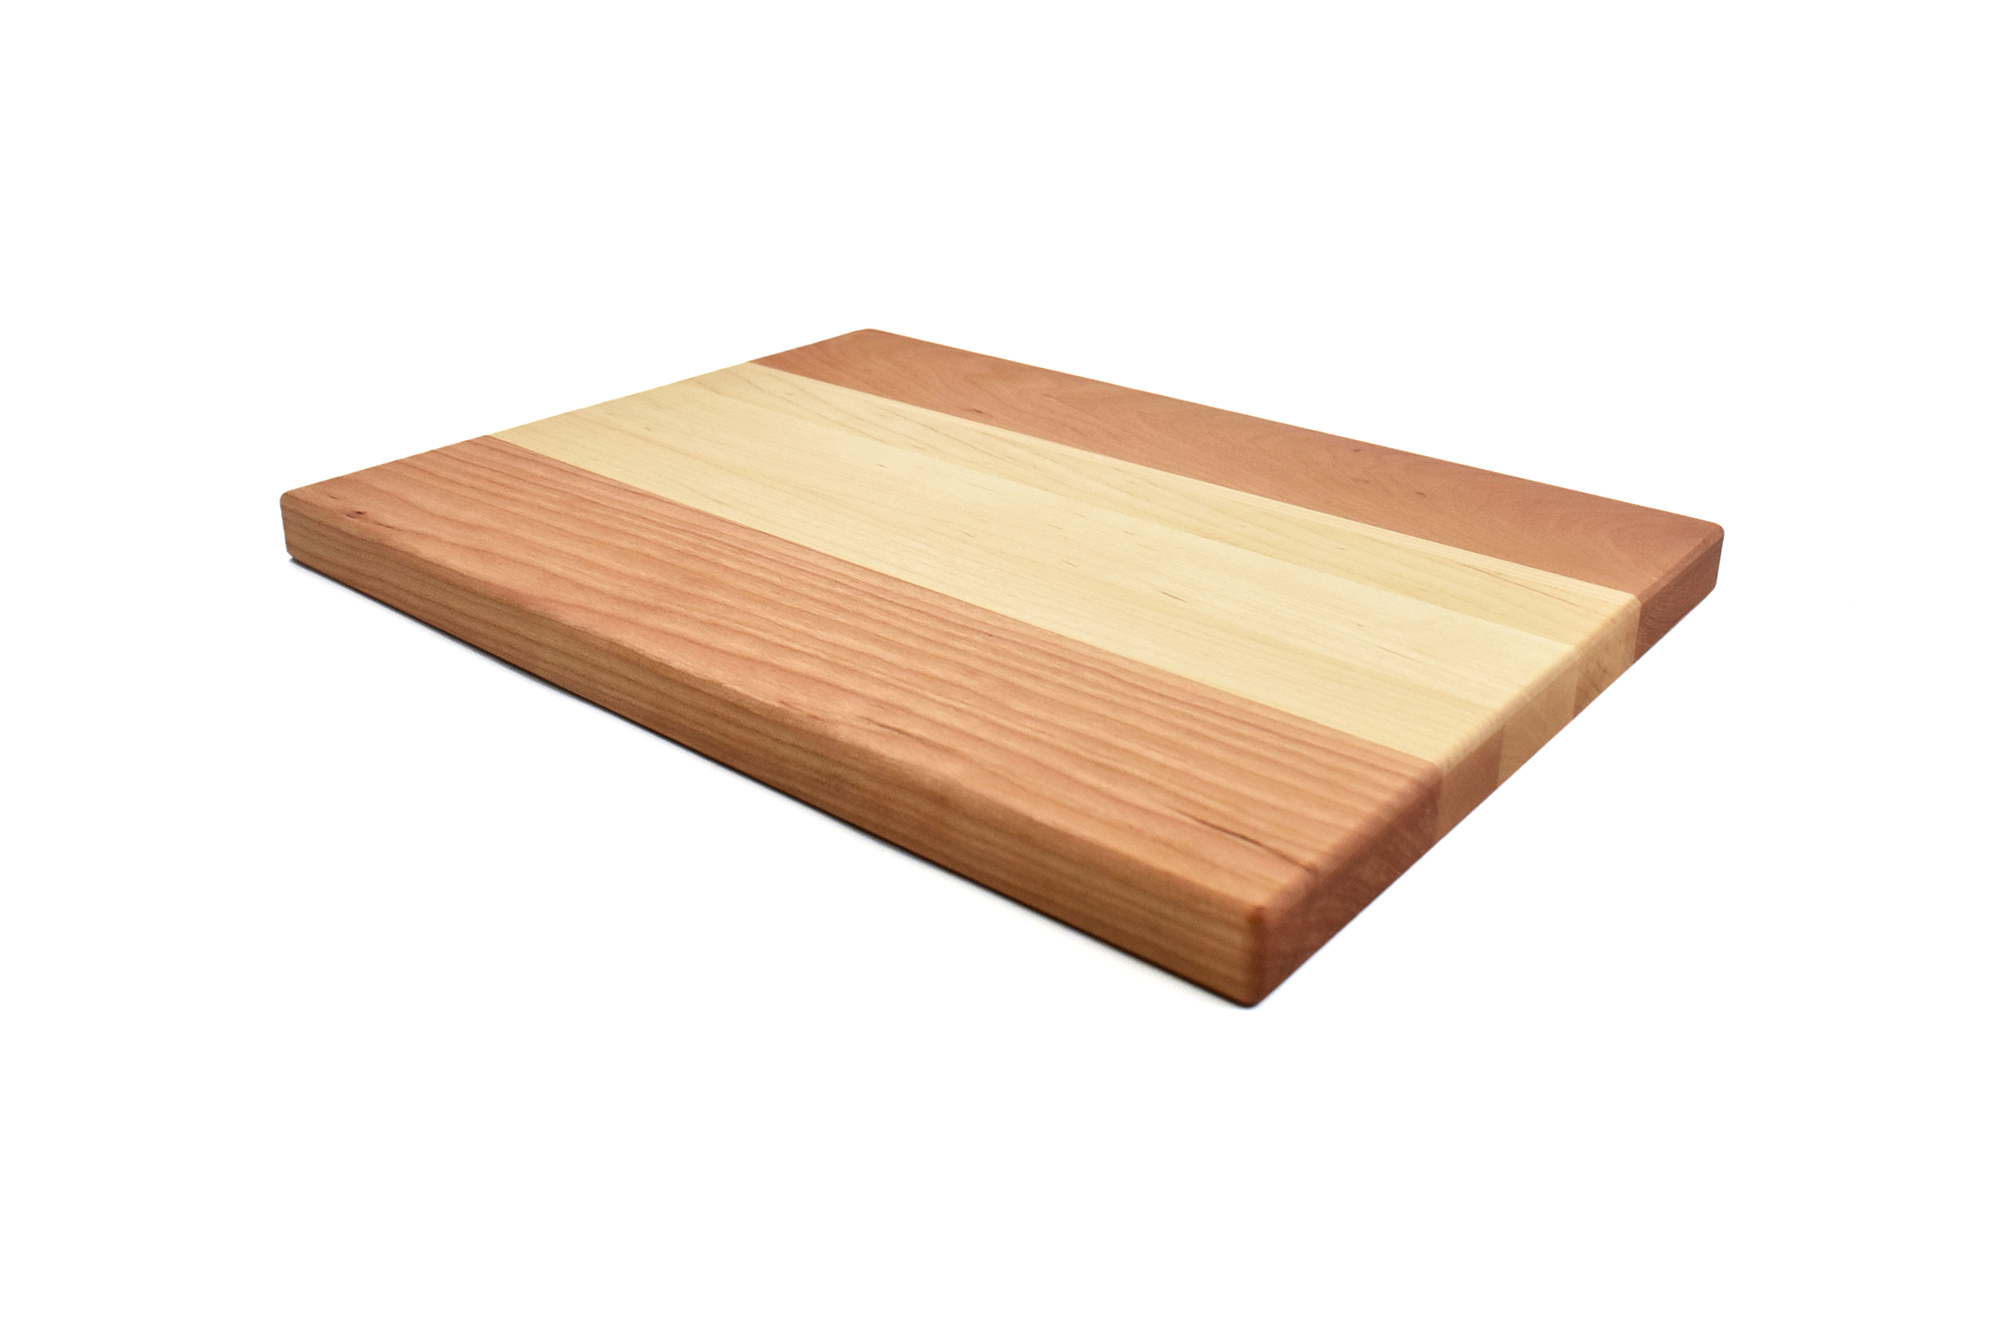 Multi wood species cutting board - Cherry wood ends with Maple wood in the middle